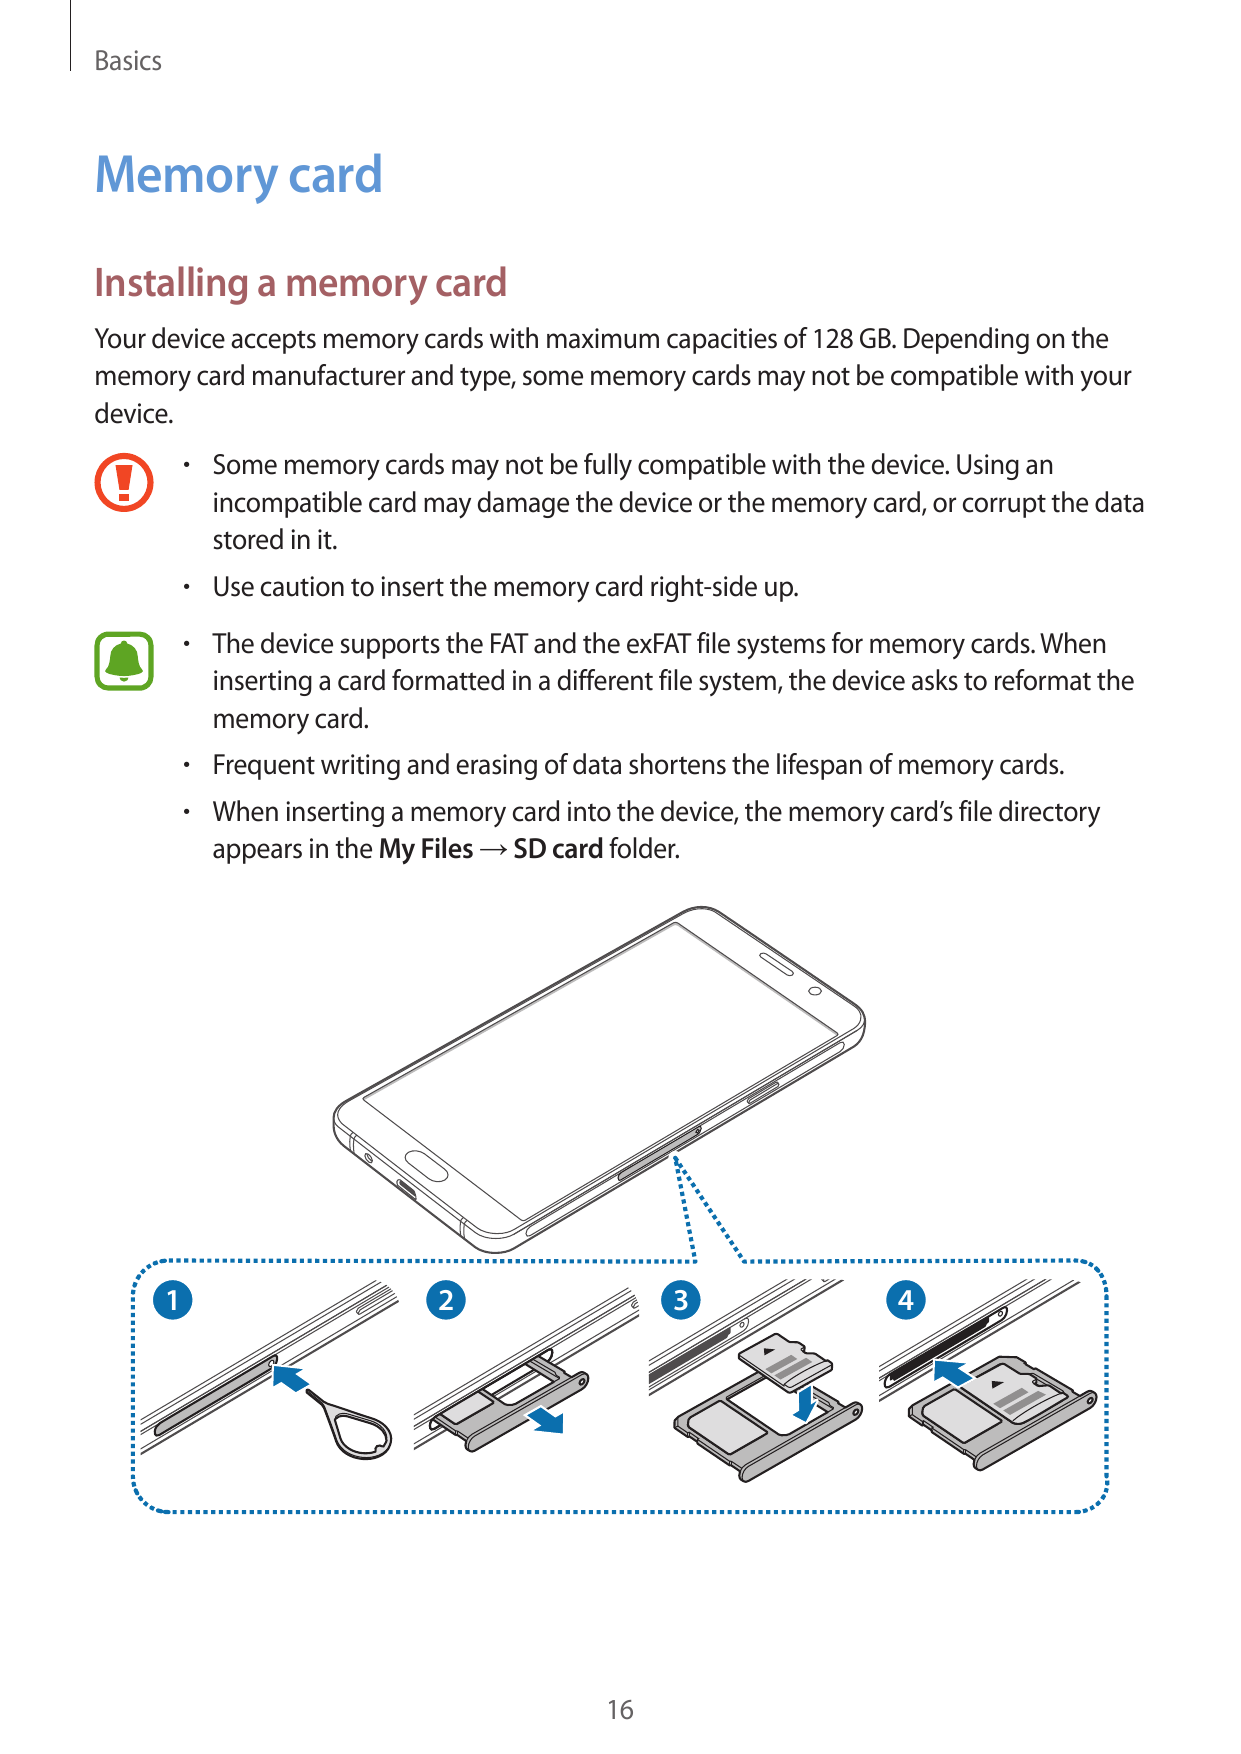 BasicsMemory cardInstalling a memory cardYour device accepts memory cards with maximum capacities of 128 GB. Depending on themem